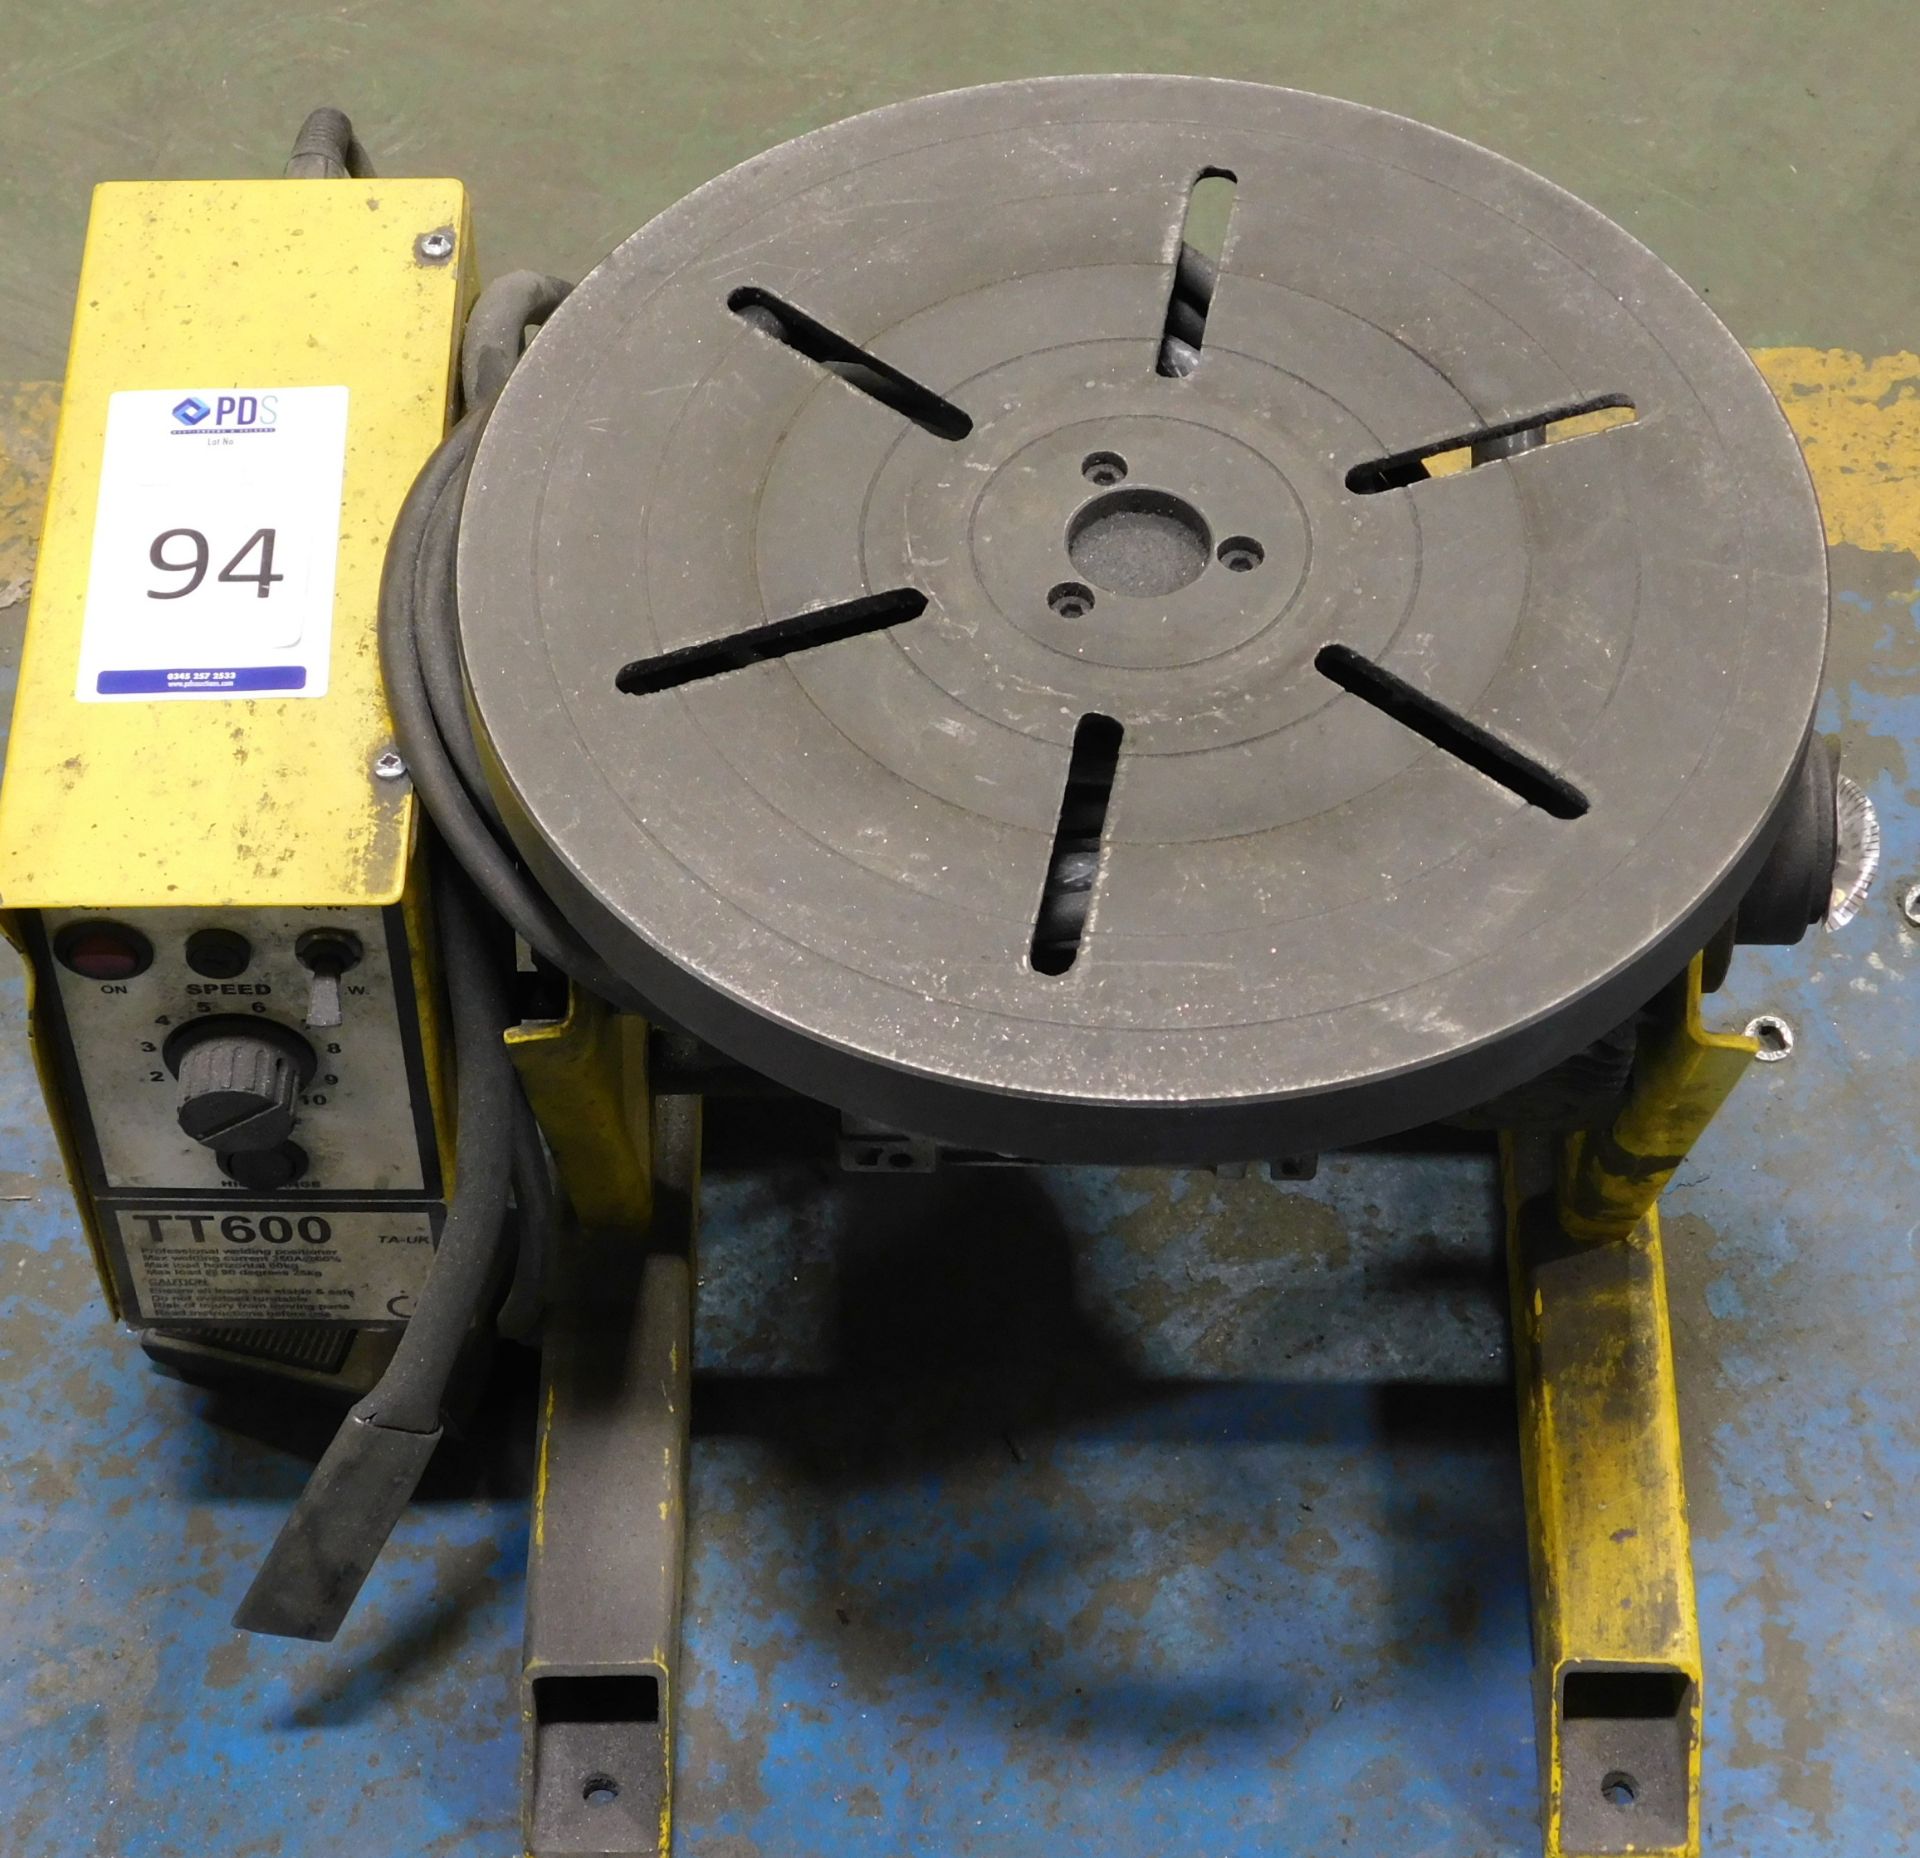 Technical Arc UK TT600 Professional Welding Positioner (Location: Kettering - See General Notes